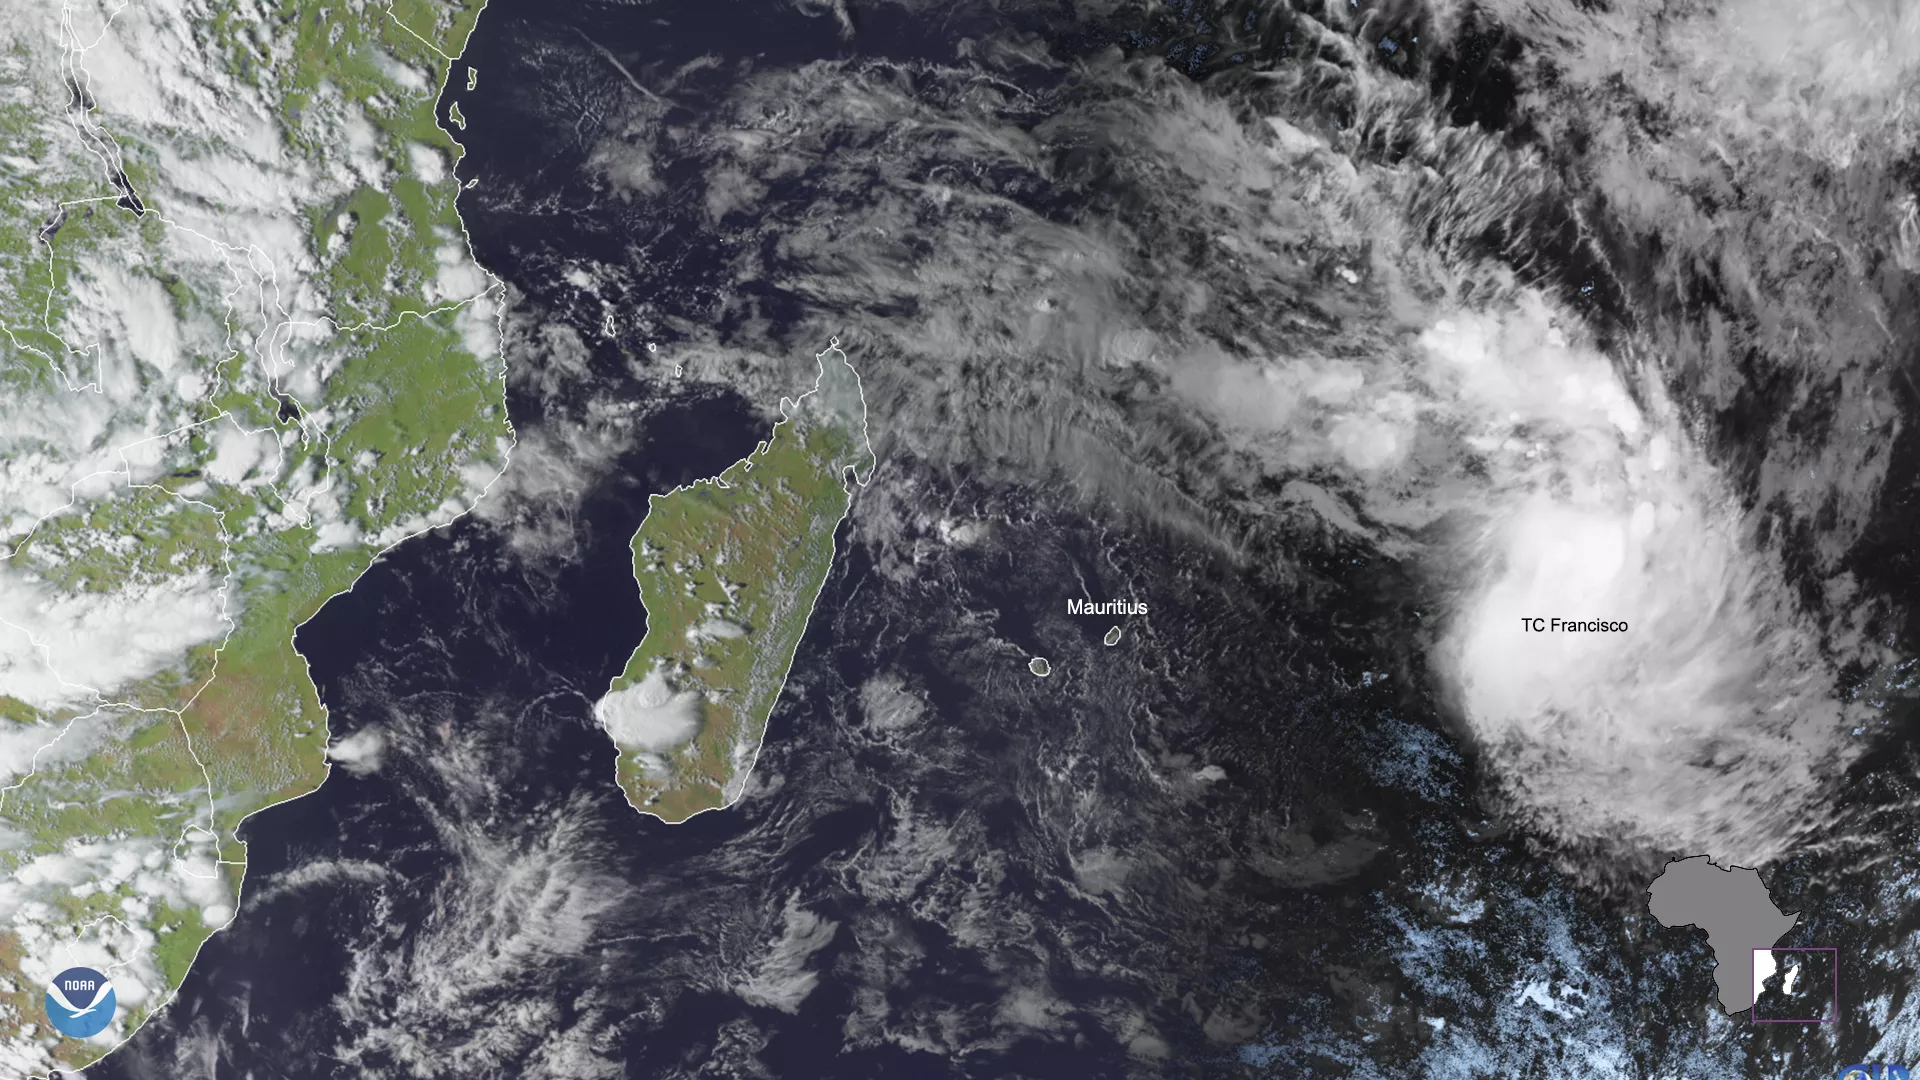  Meteosat-8 satellite imagery of Tropical Cyclone Francisco and the island of Mauritius in the south Indian Ocean, Feb. 5, 2020.